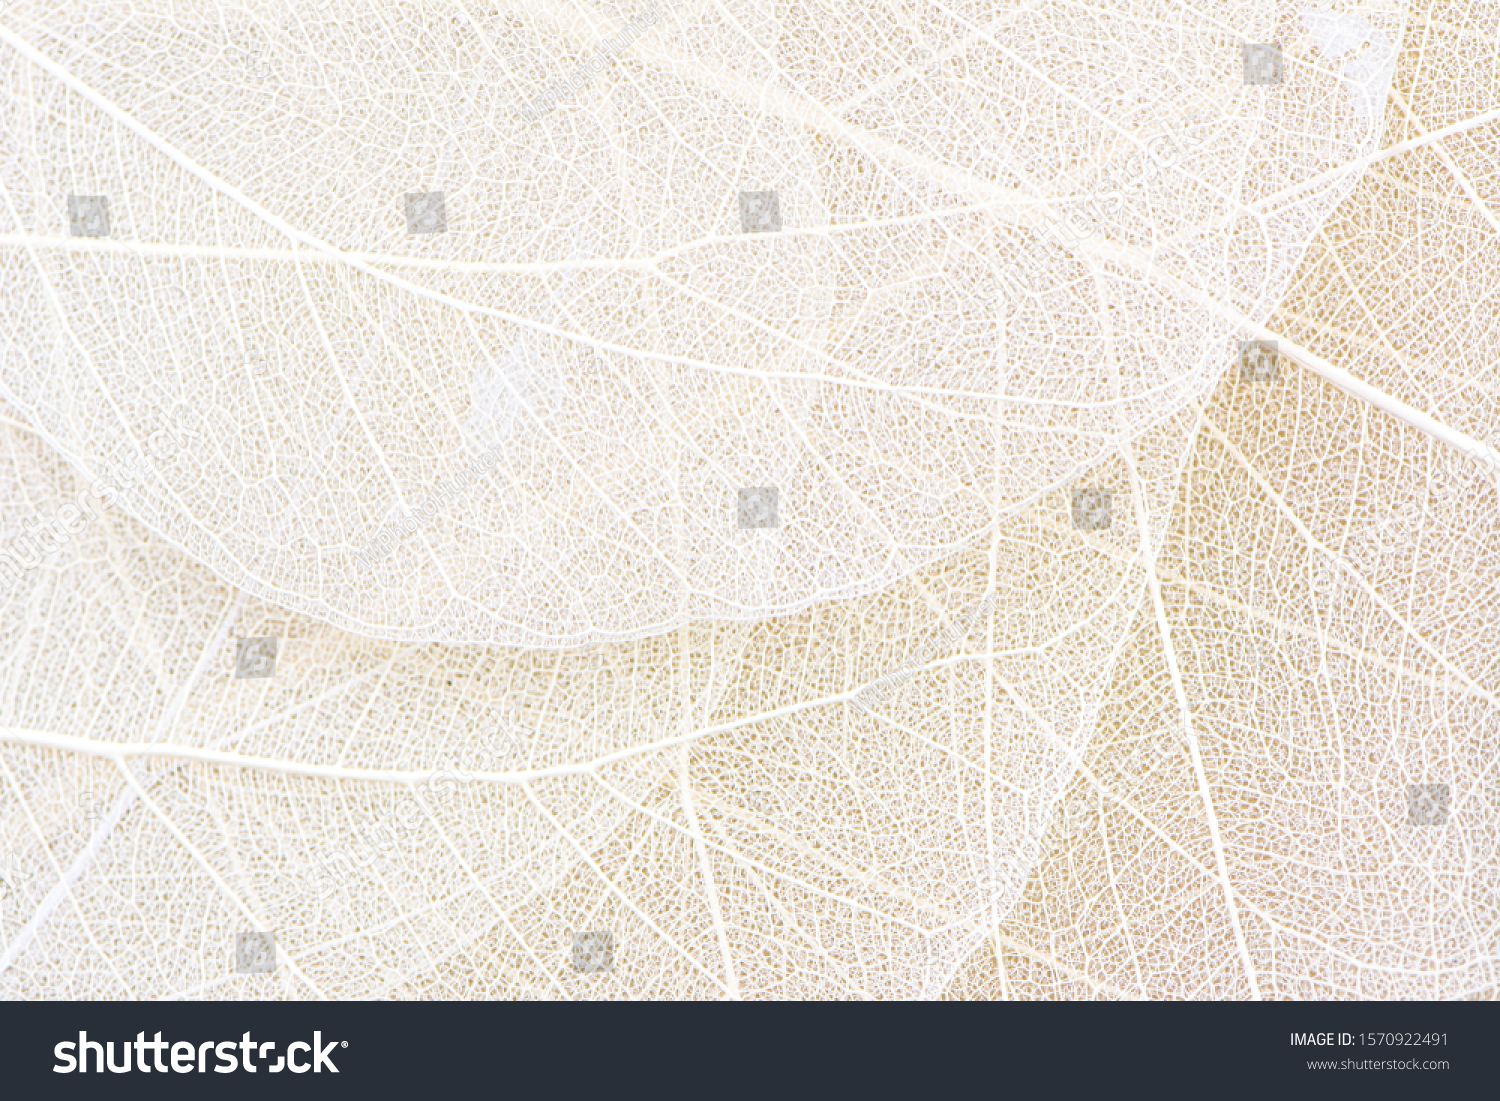 Close up of Fiber structure of dry leaves texture background. Cell patterns of Skeletons leaves, foliage branches, Leaf veins abstract of Autumn background for creative banner design or greeting card #1570922491